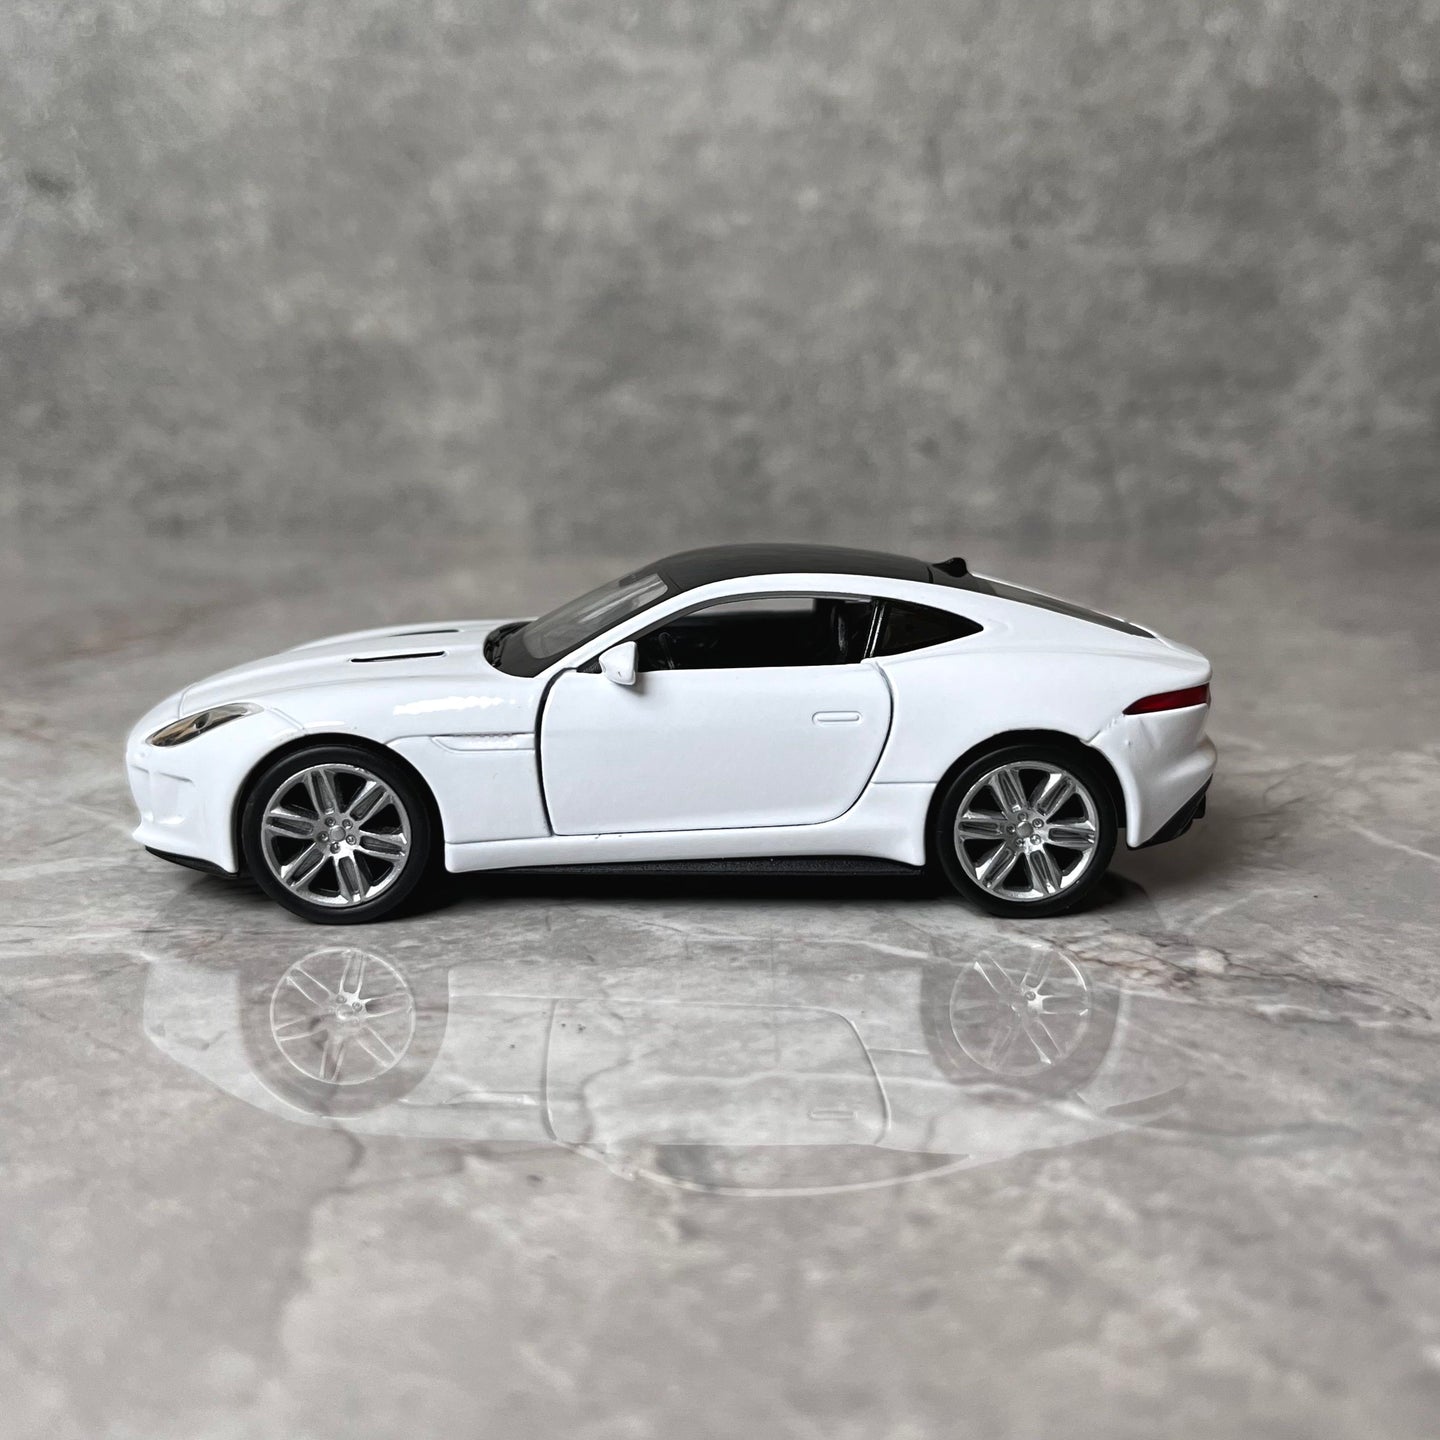 1:36 Jaguar F-Type Coupe Diecast Car Model By Welly